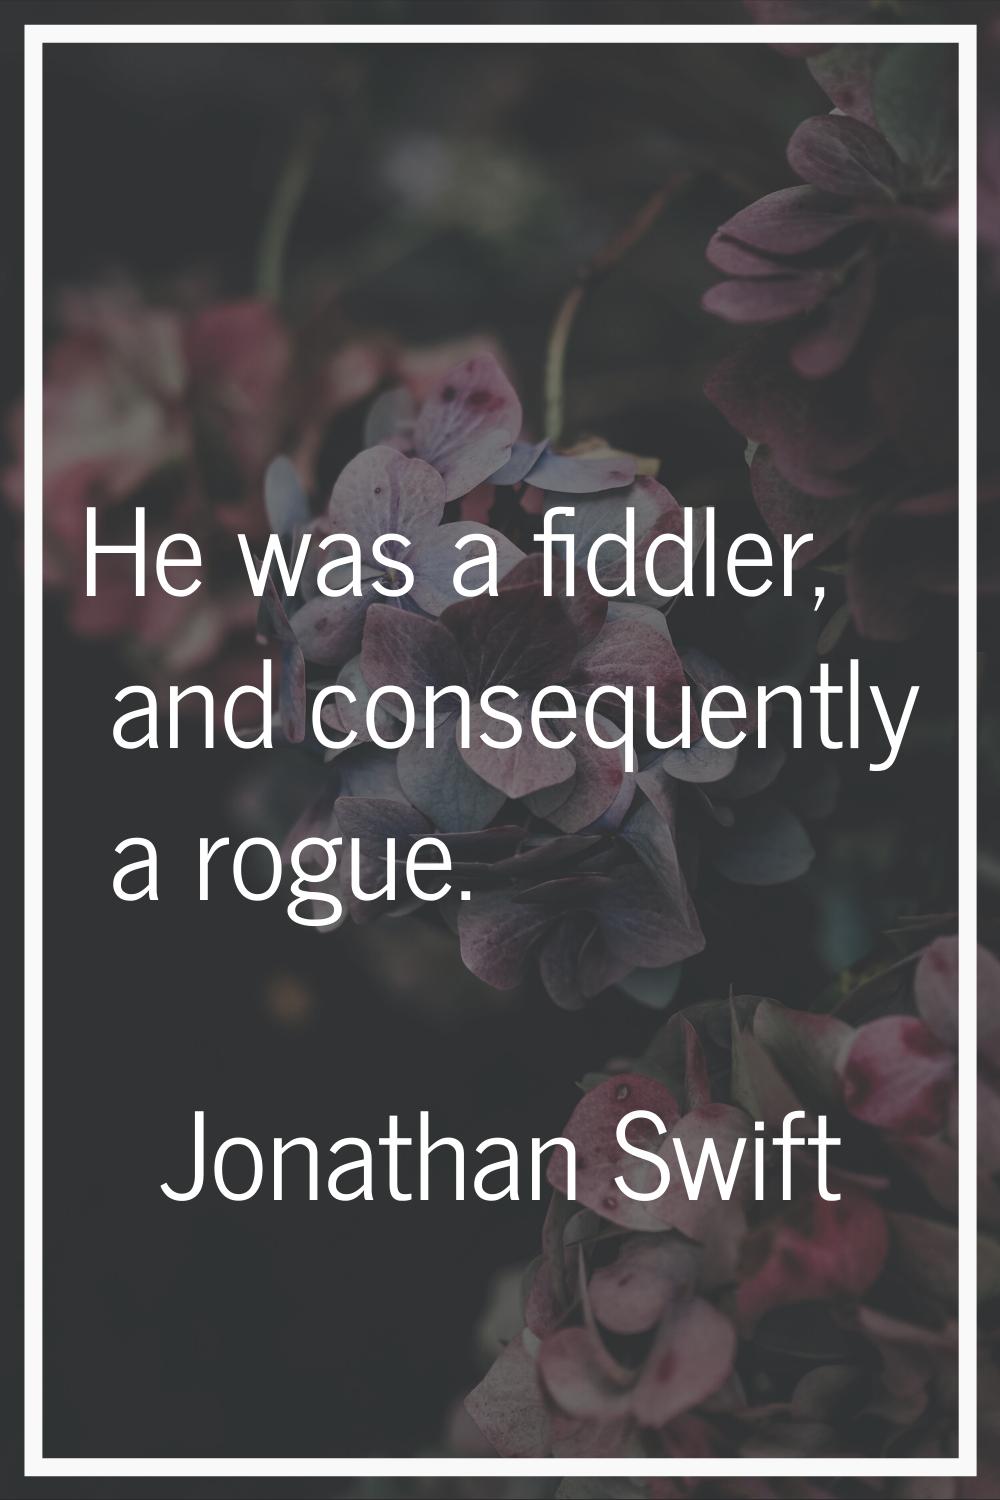 He was a fiddler, and consequently a rogue.